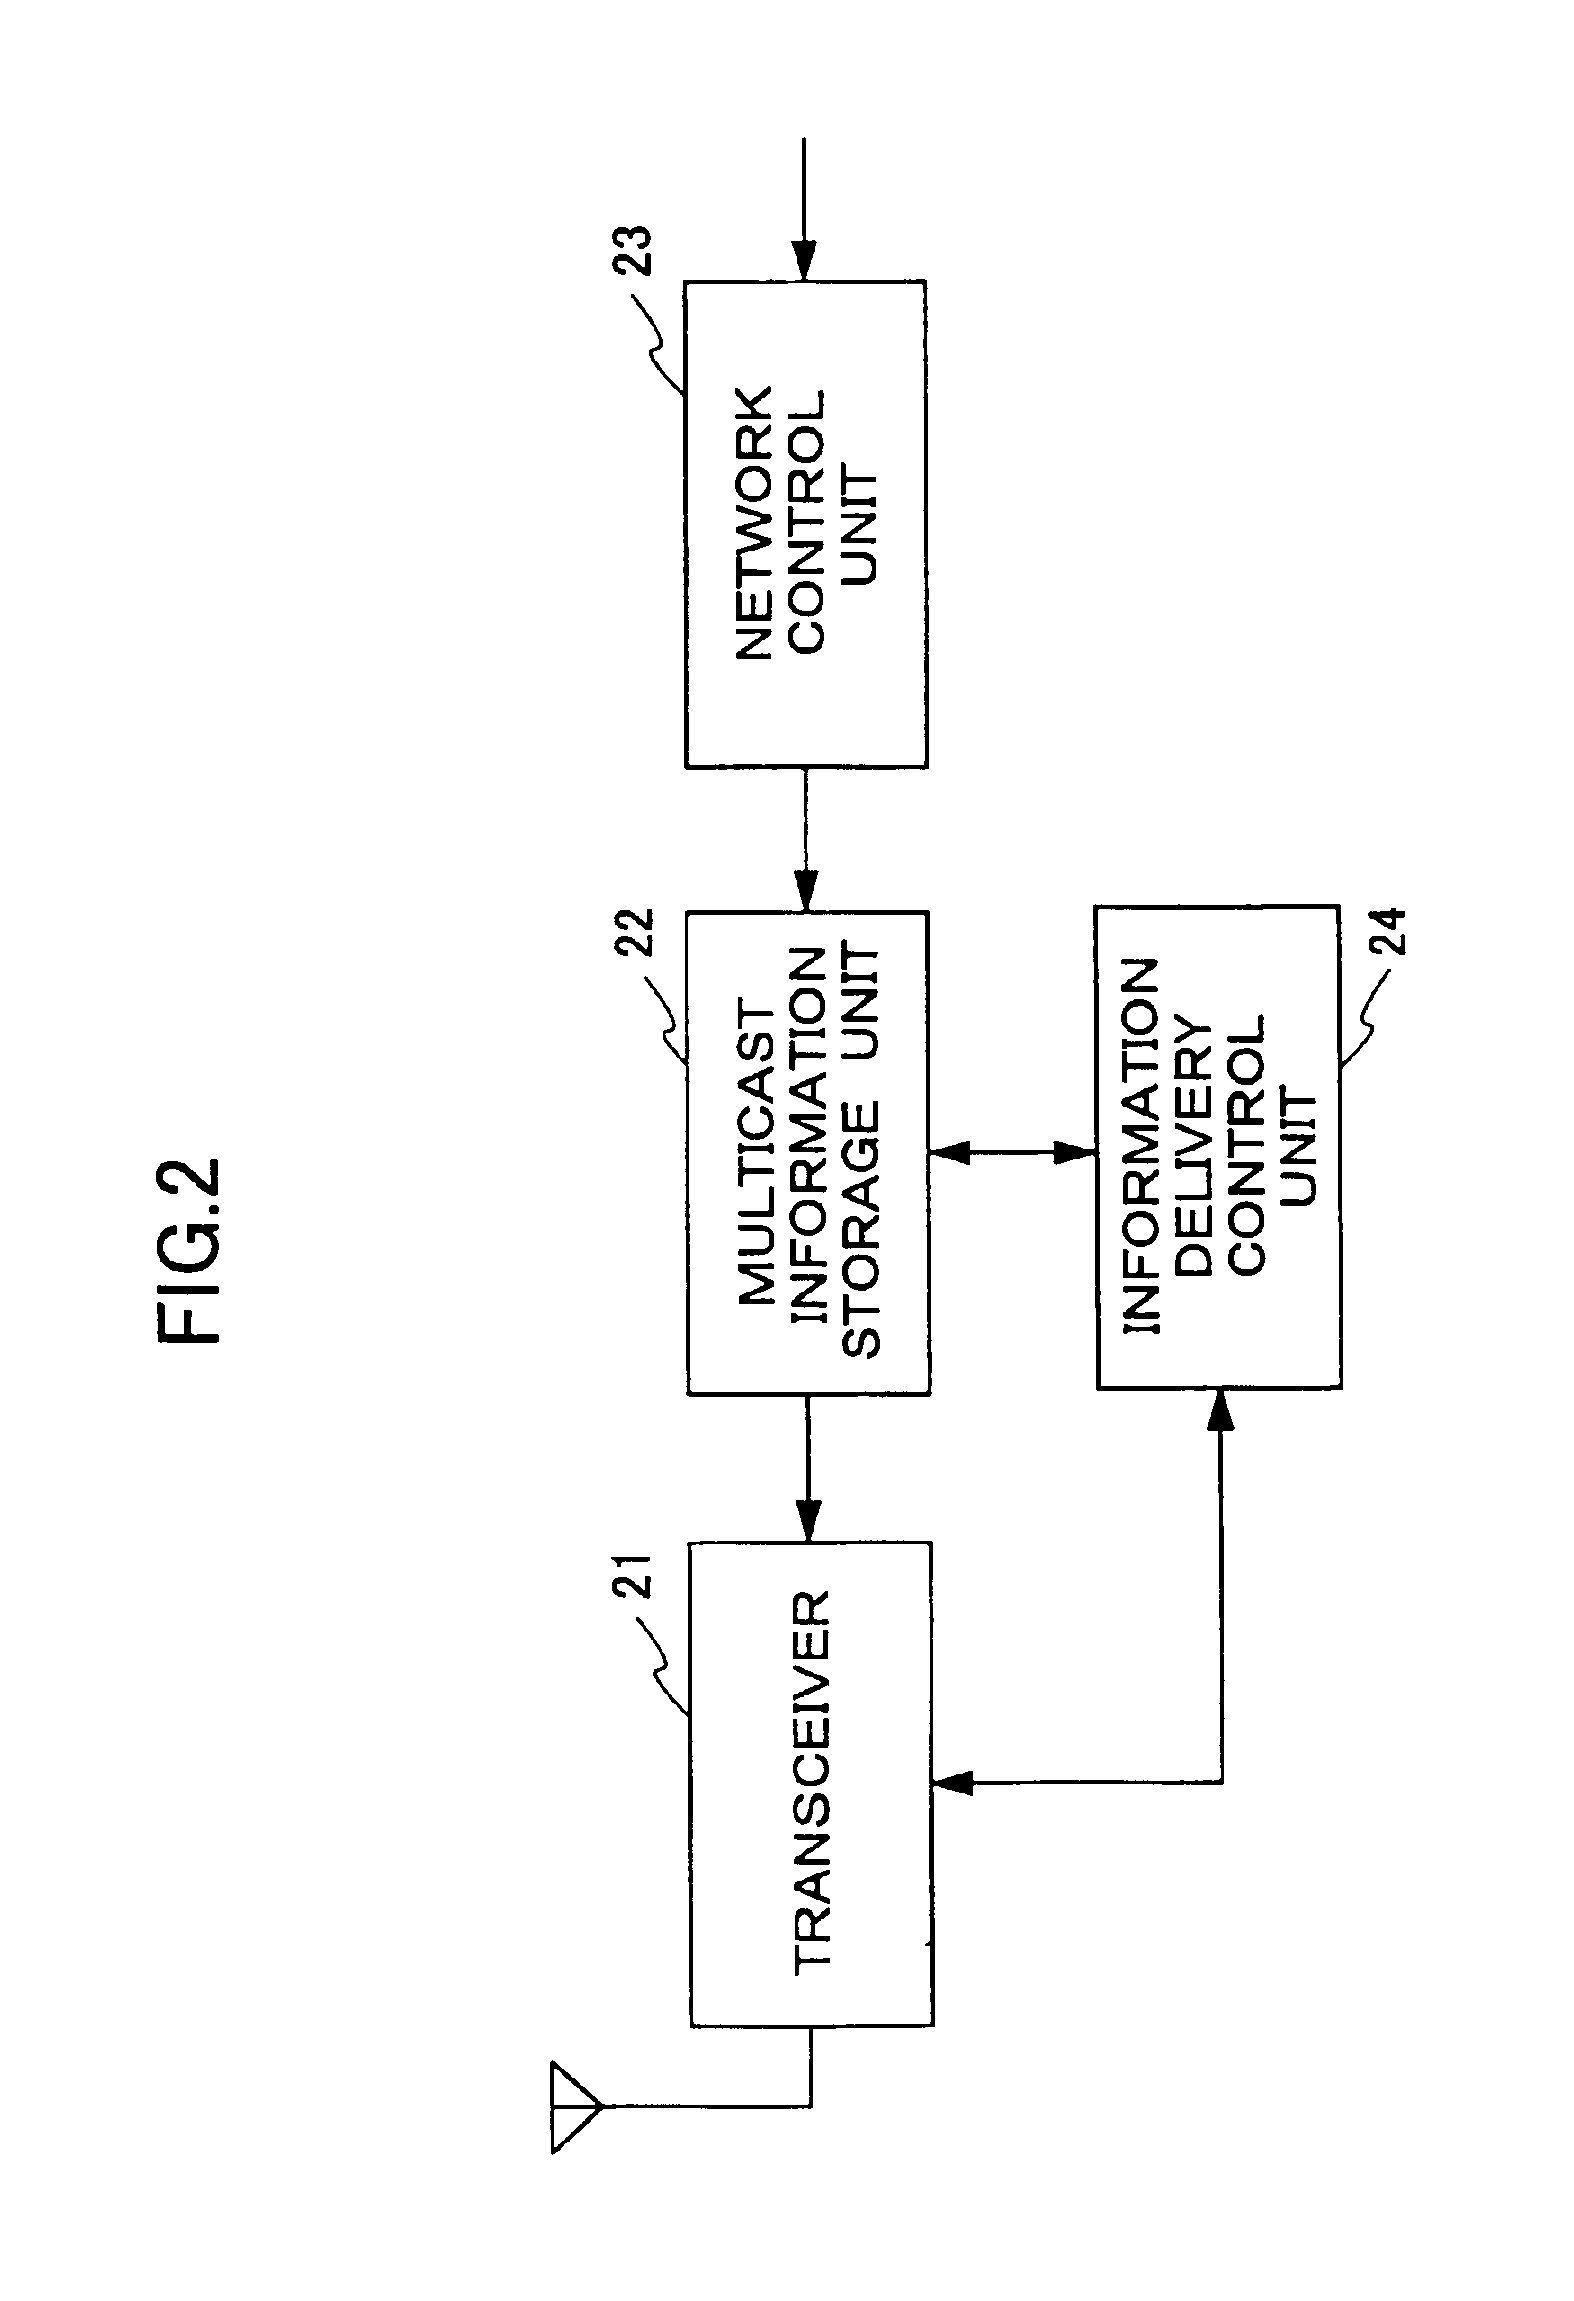 Rendering multicast service with sufficient reception quality to wireless terminals